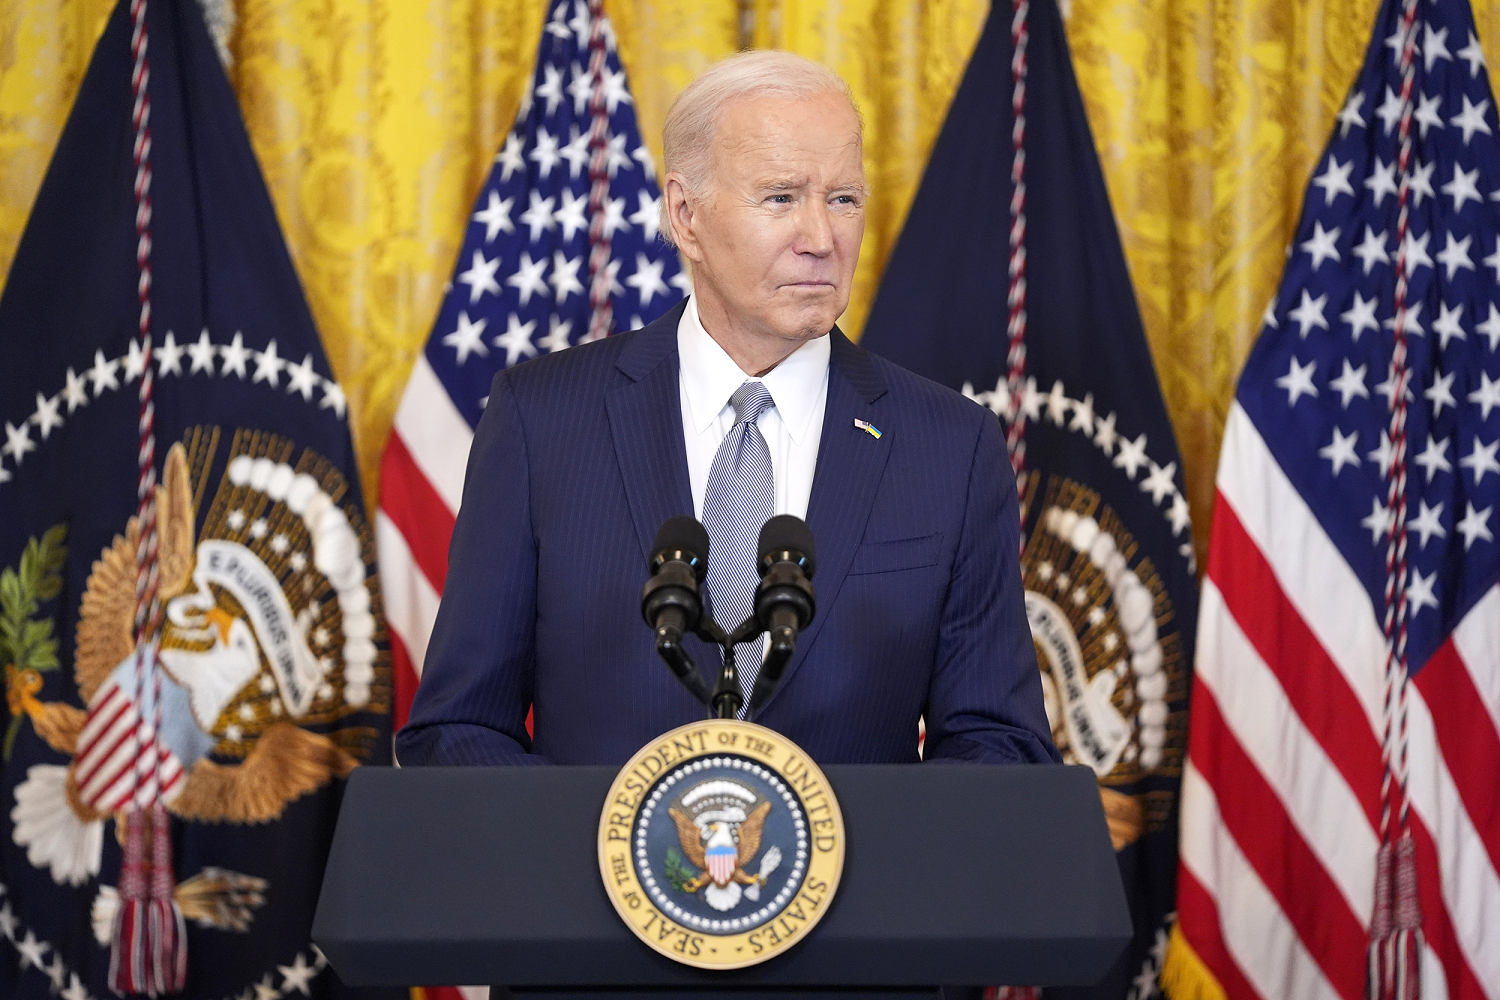 Biden says he hopes to see Gaza cease-fire by next week after progress in negotiations